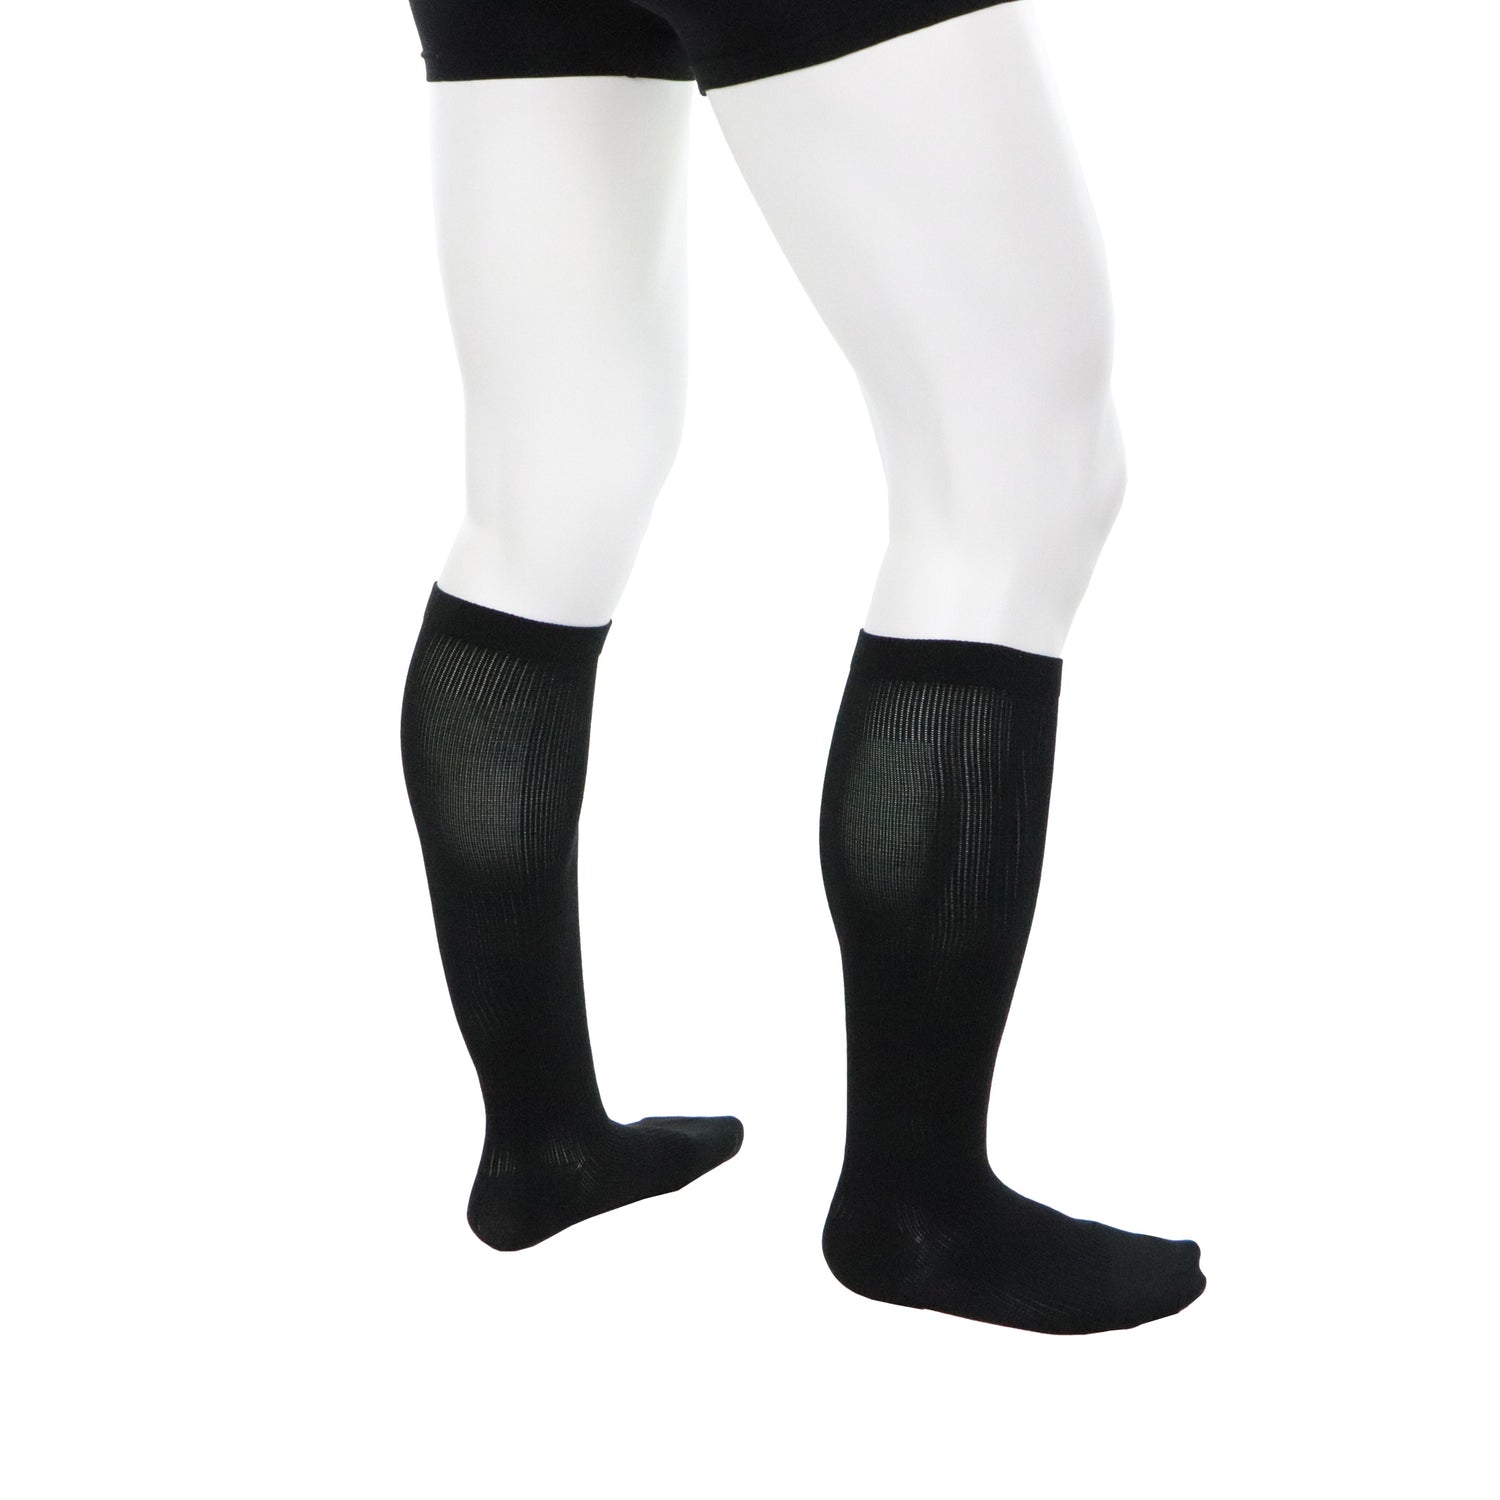 Actiman Compression Socks For Men Collection